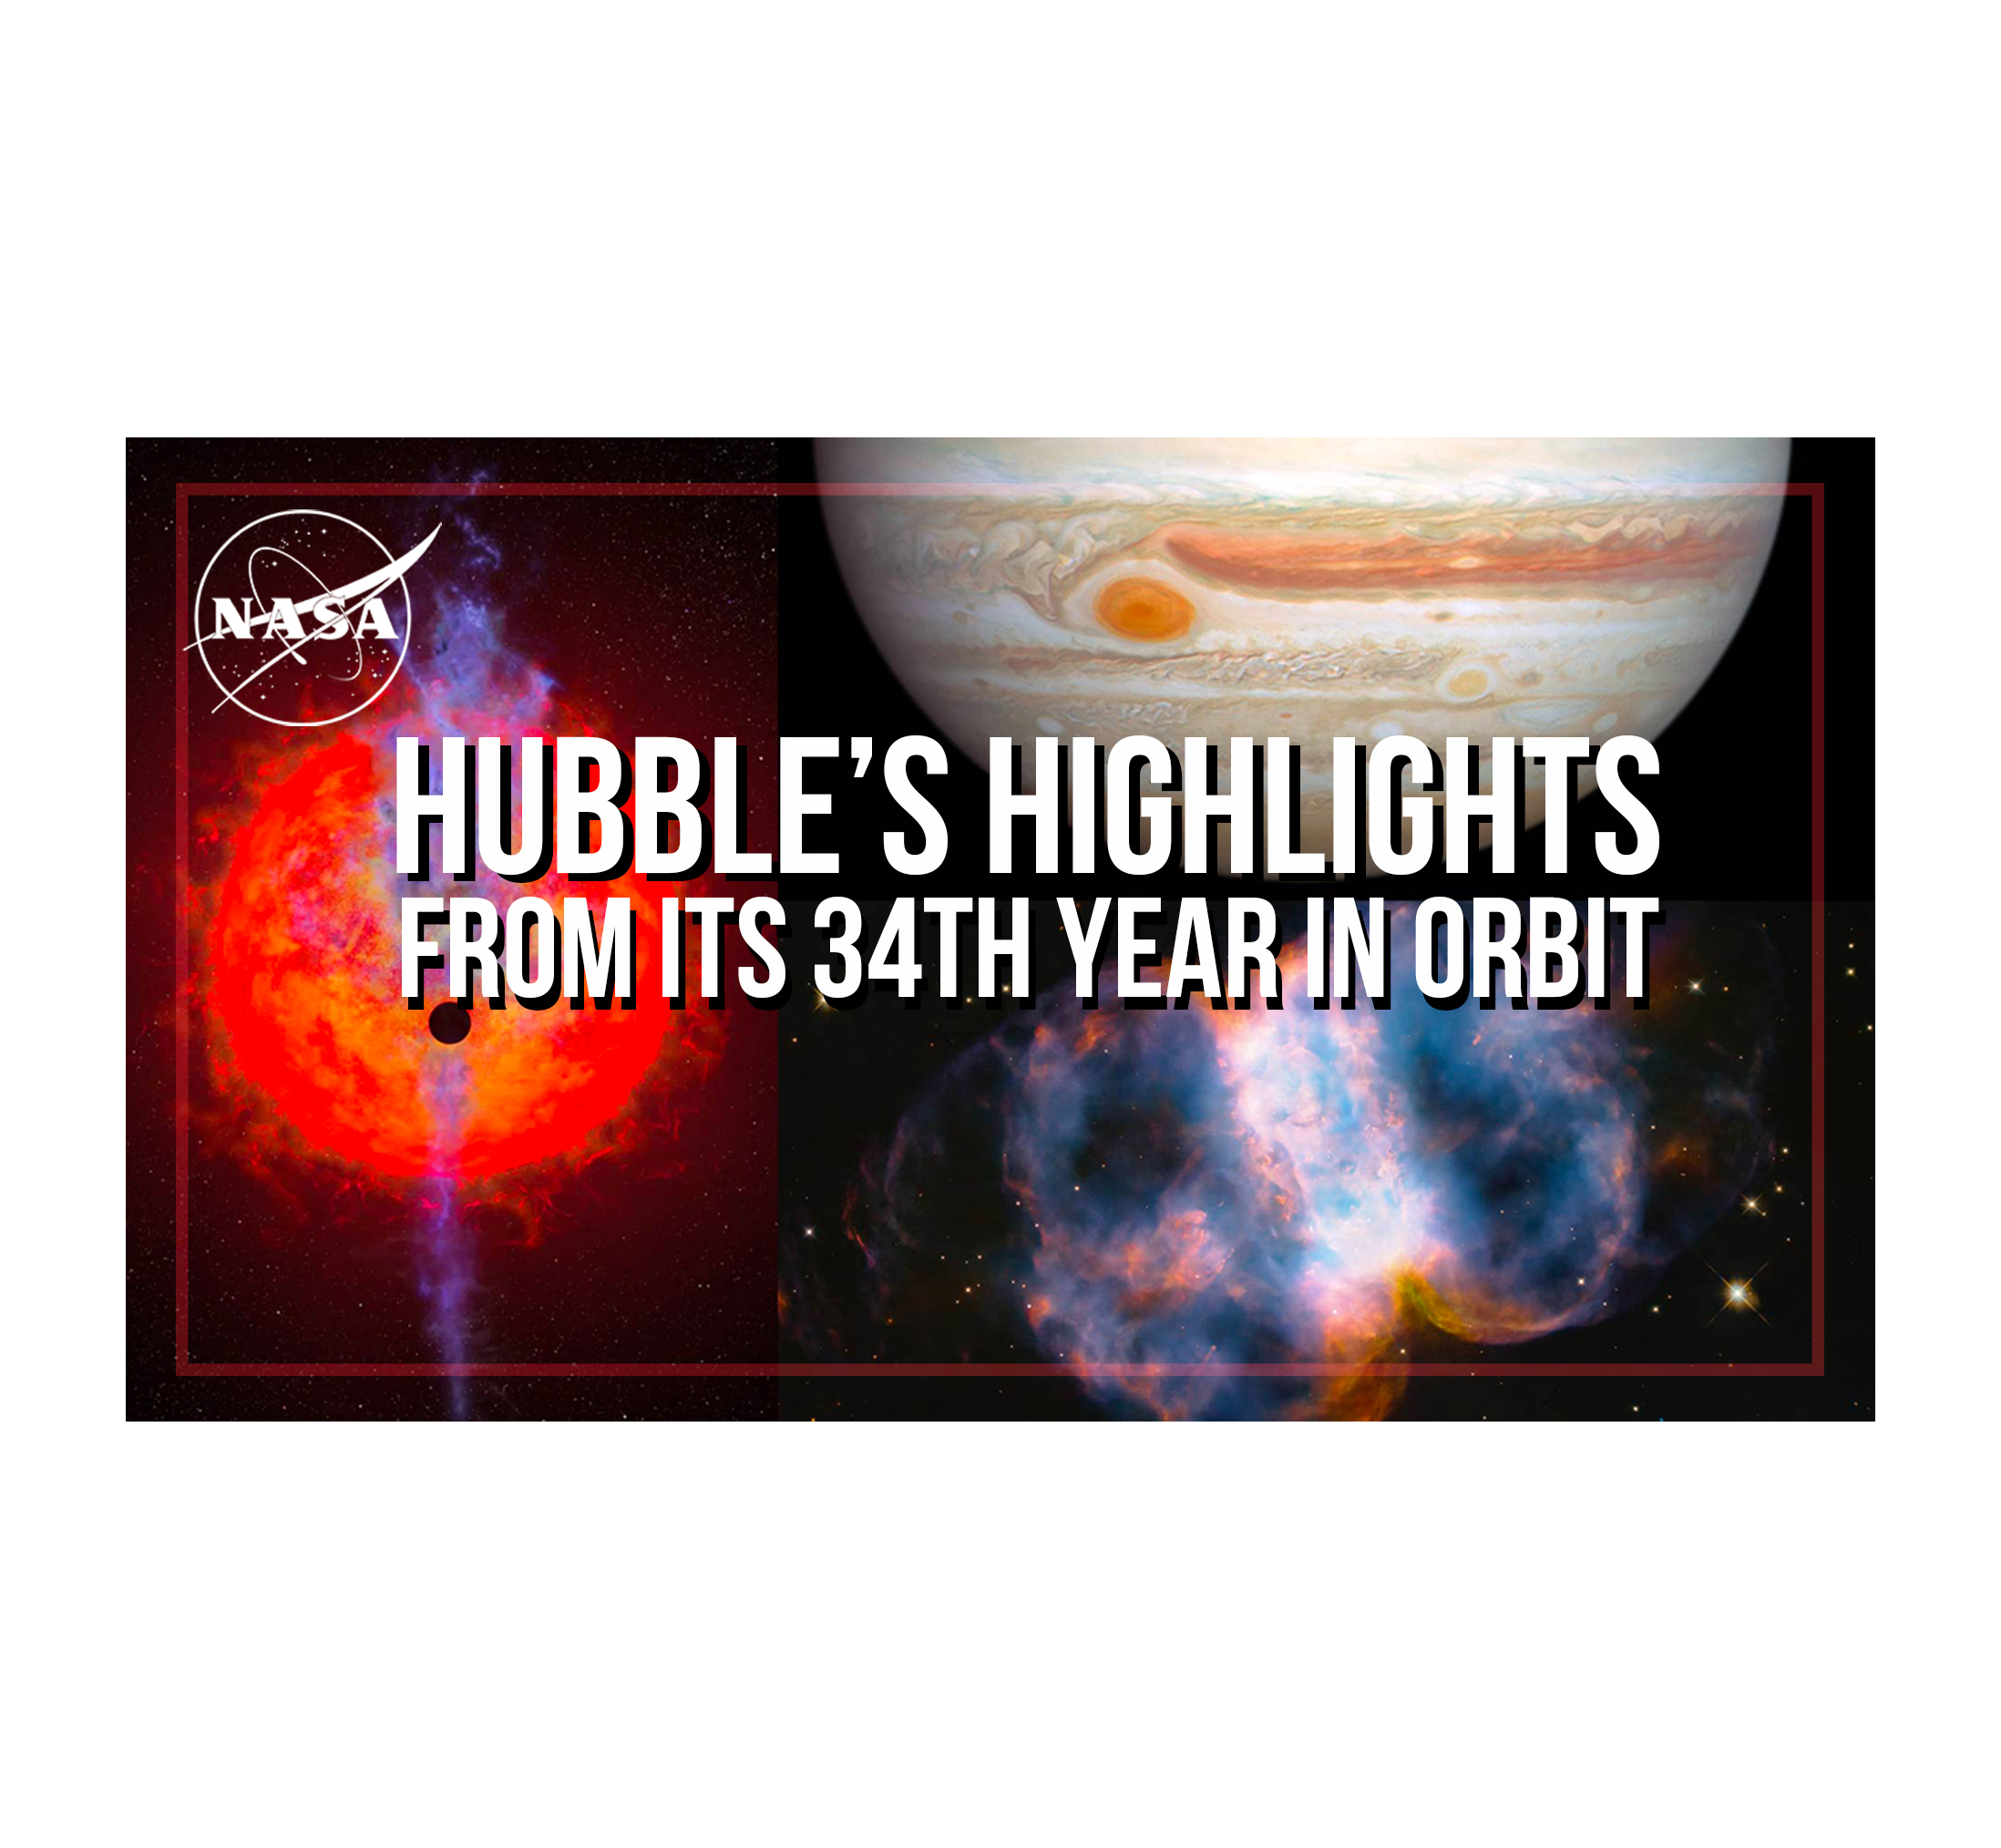 Text: Hubble's Highlights From its 34th Year in Orbit. Background images: artist illustration of a planet passing in front of a star, an image of Jupiter, an image of the Little Dumbbell Nebula.